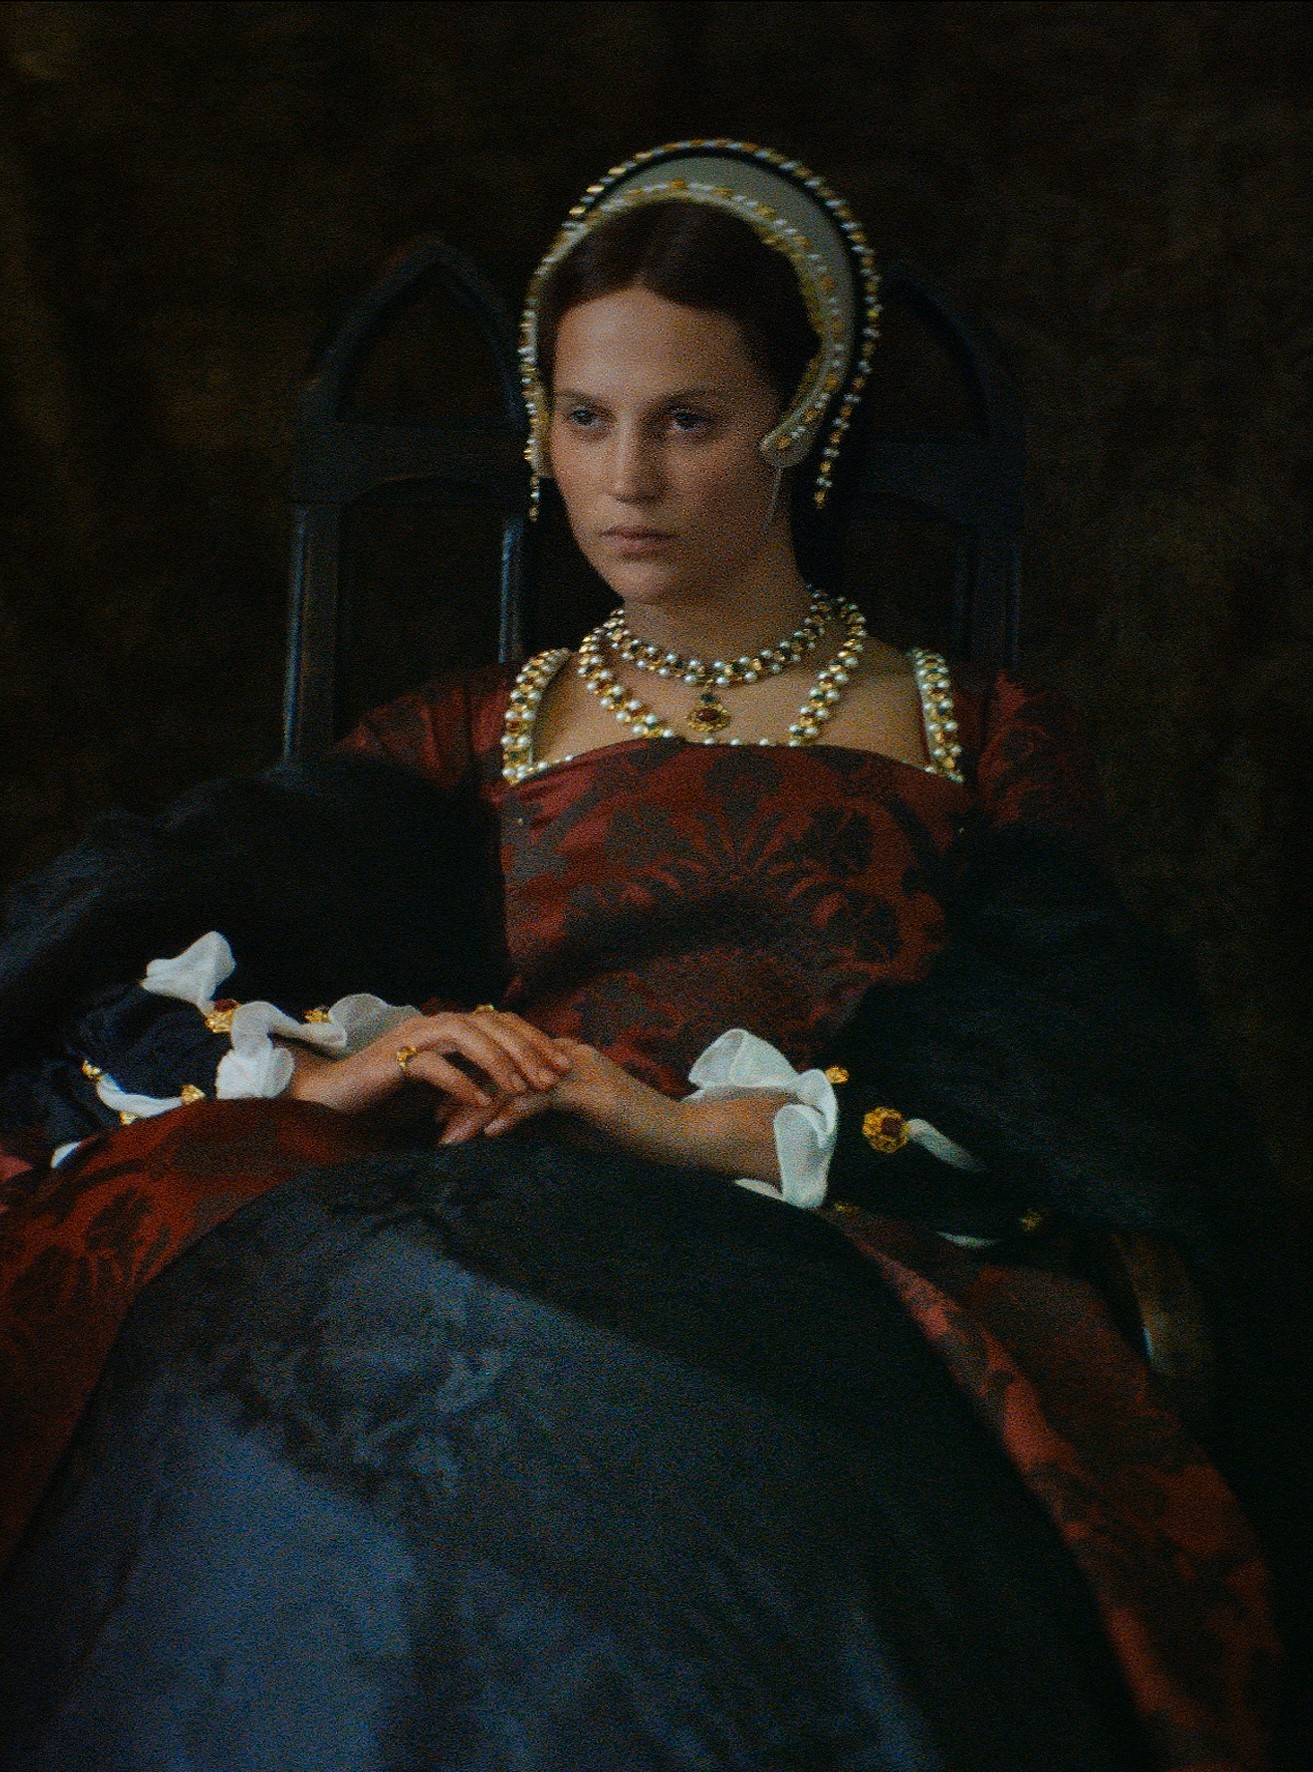 <p>History lovers won't be able to get enough of this summer movie, which follows Katherine Parr as she fights to survive the final months of Henry VIII's life. It's a realistic and brutal take on Tudor England, but promises to be more than compelling.</p><p><em>Firebrand hits theaters June 21 and stars Alicia Vikander, Jude Law, Eddie Marsan, Sam Riley, Simon Russell Beale,</em><em> and Erin Doherty.</em></p>